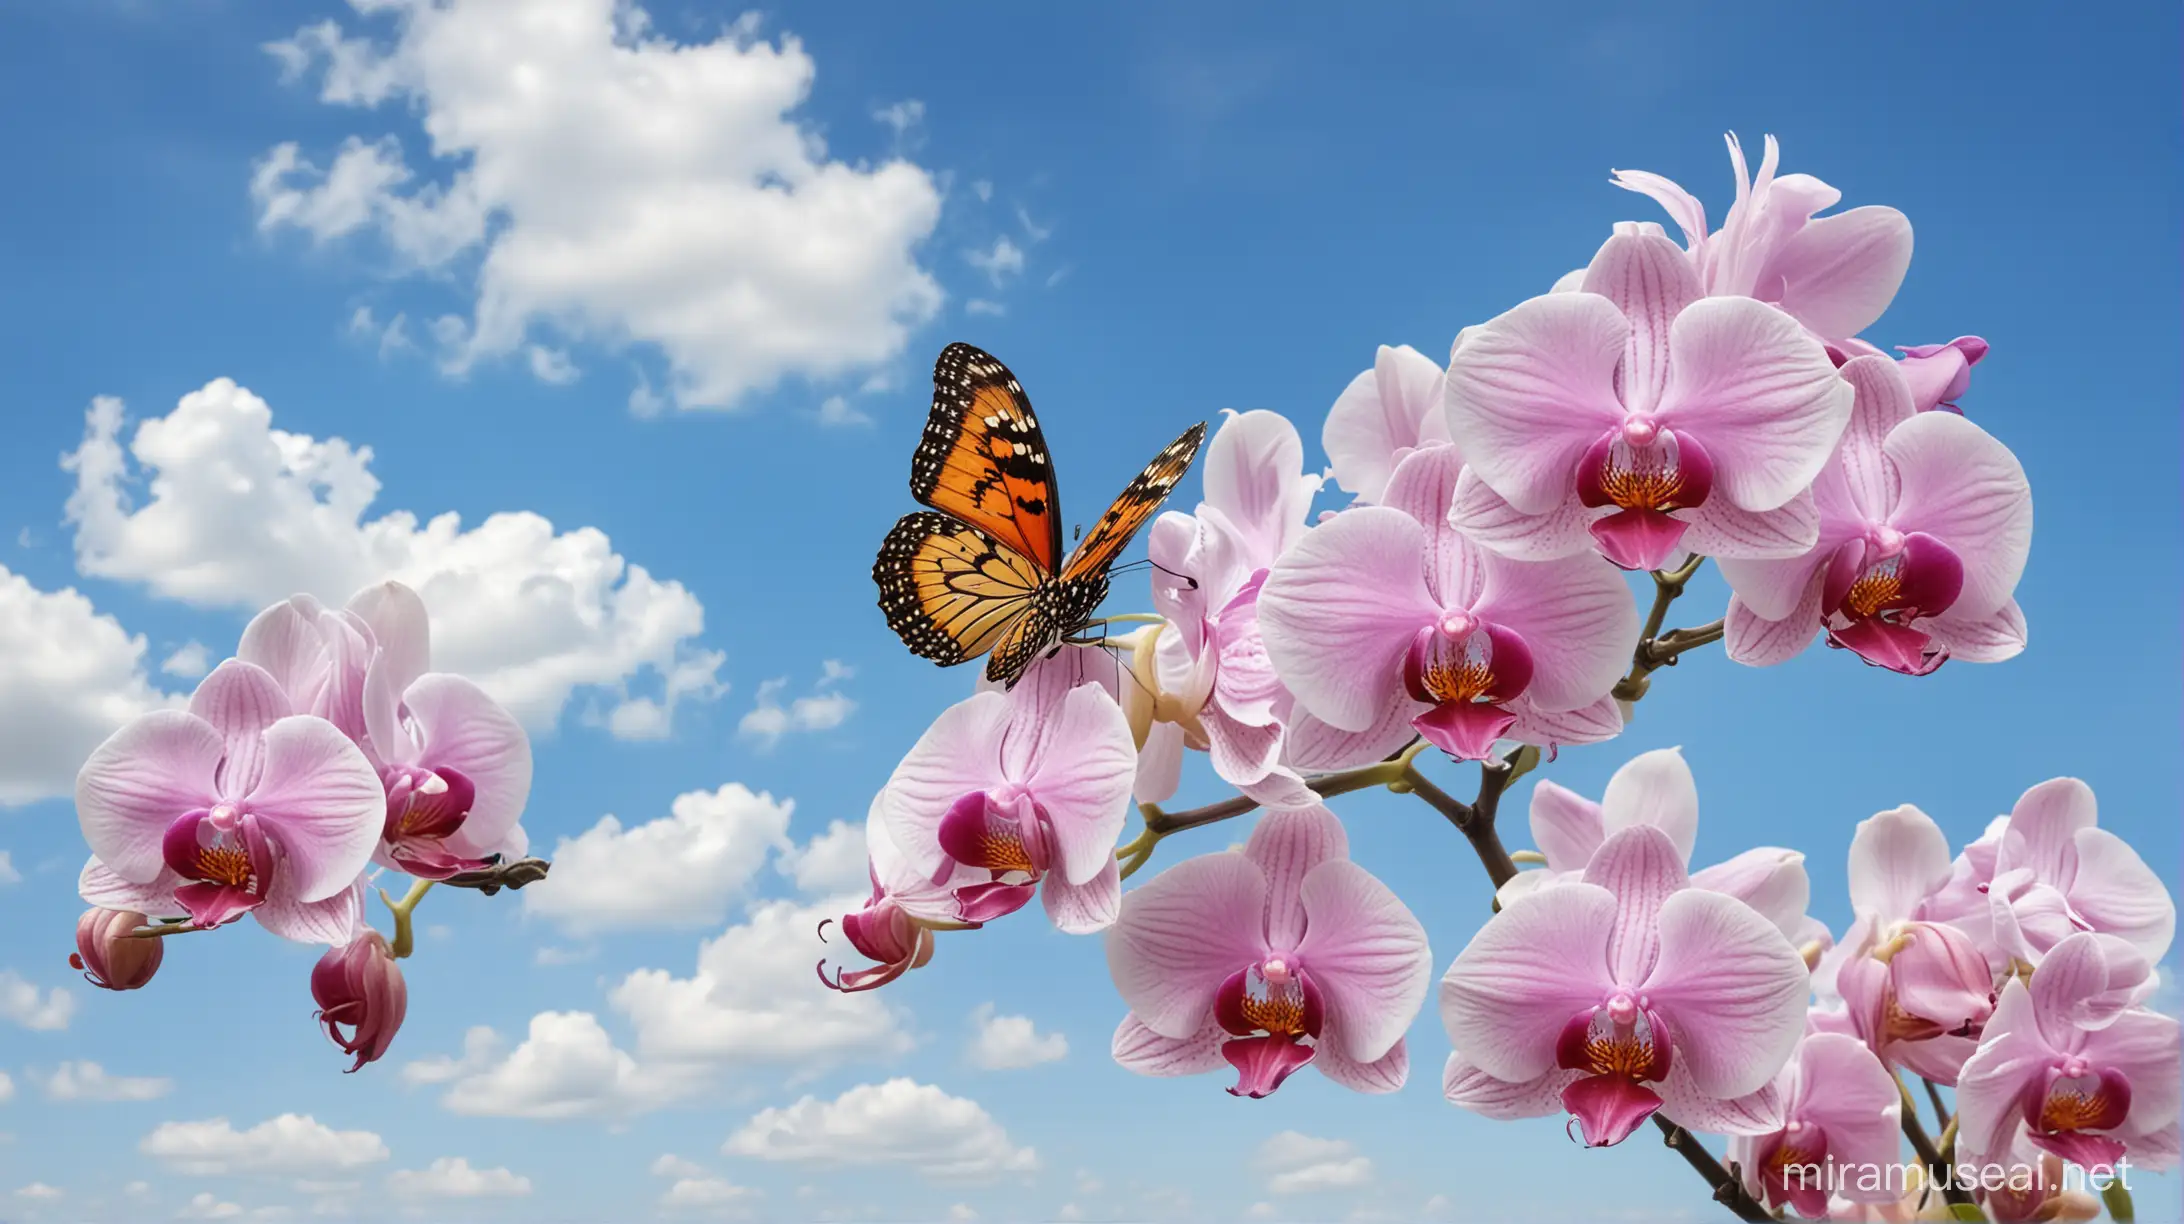 One Colorful butterfly with orchids and blue sky